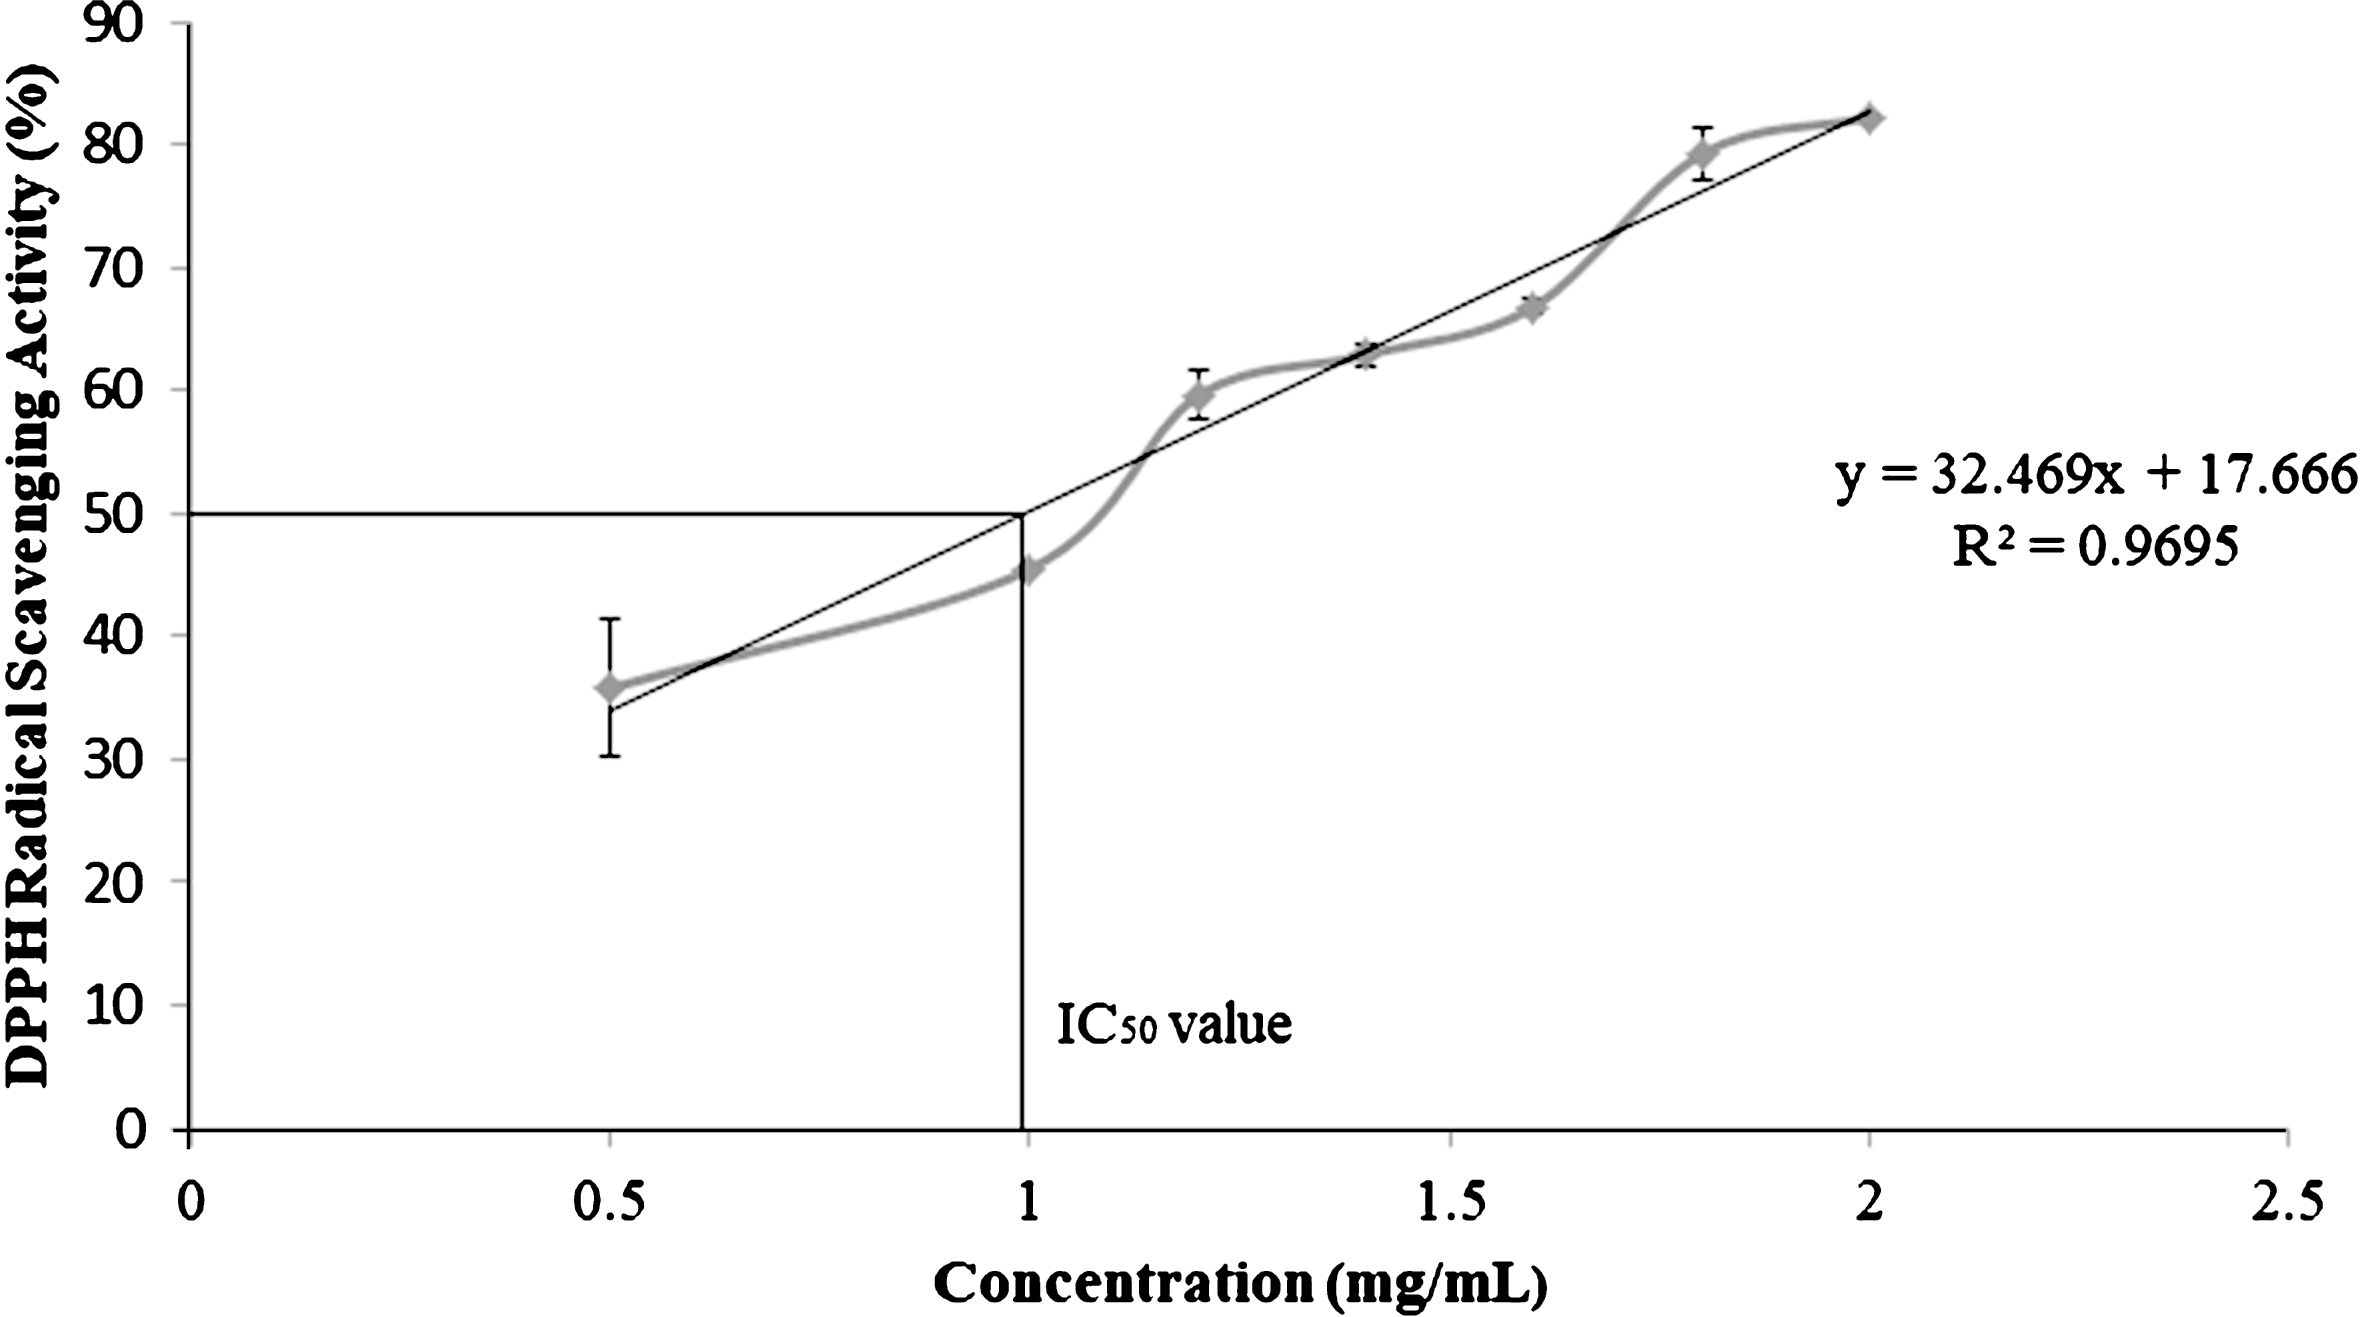 DPPH free radical scavenging activity of ethanolic extracts of C. sicyoides berries.